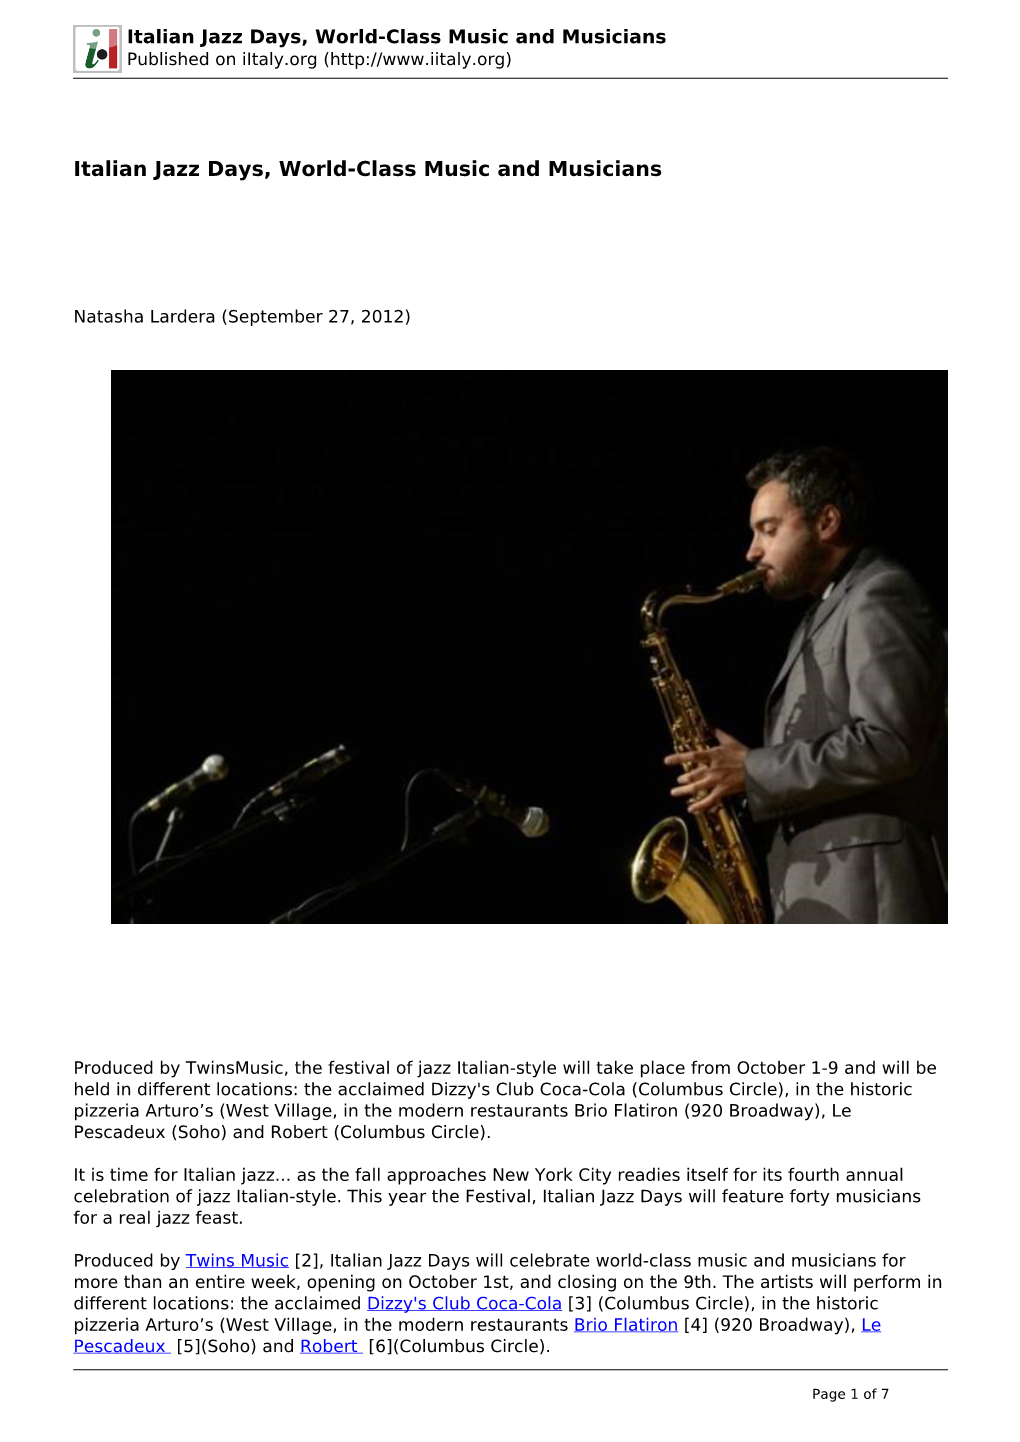 Italian Jazz Days, World-Class Music and Musicians Published on Iitaly.Org (